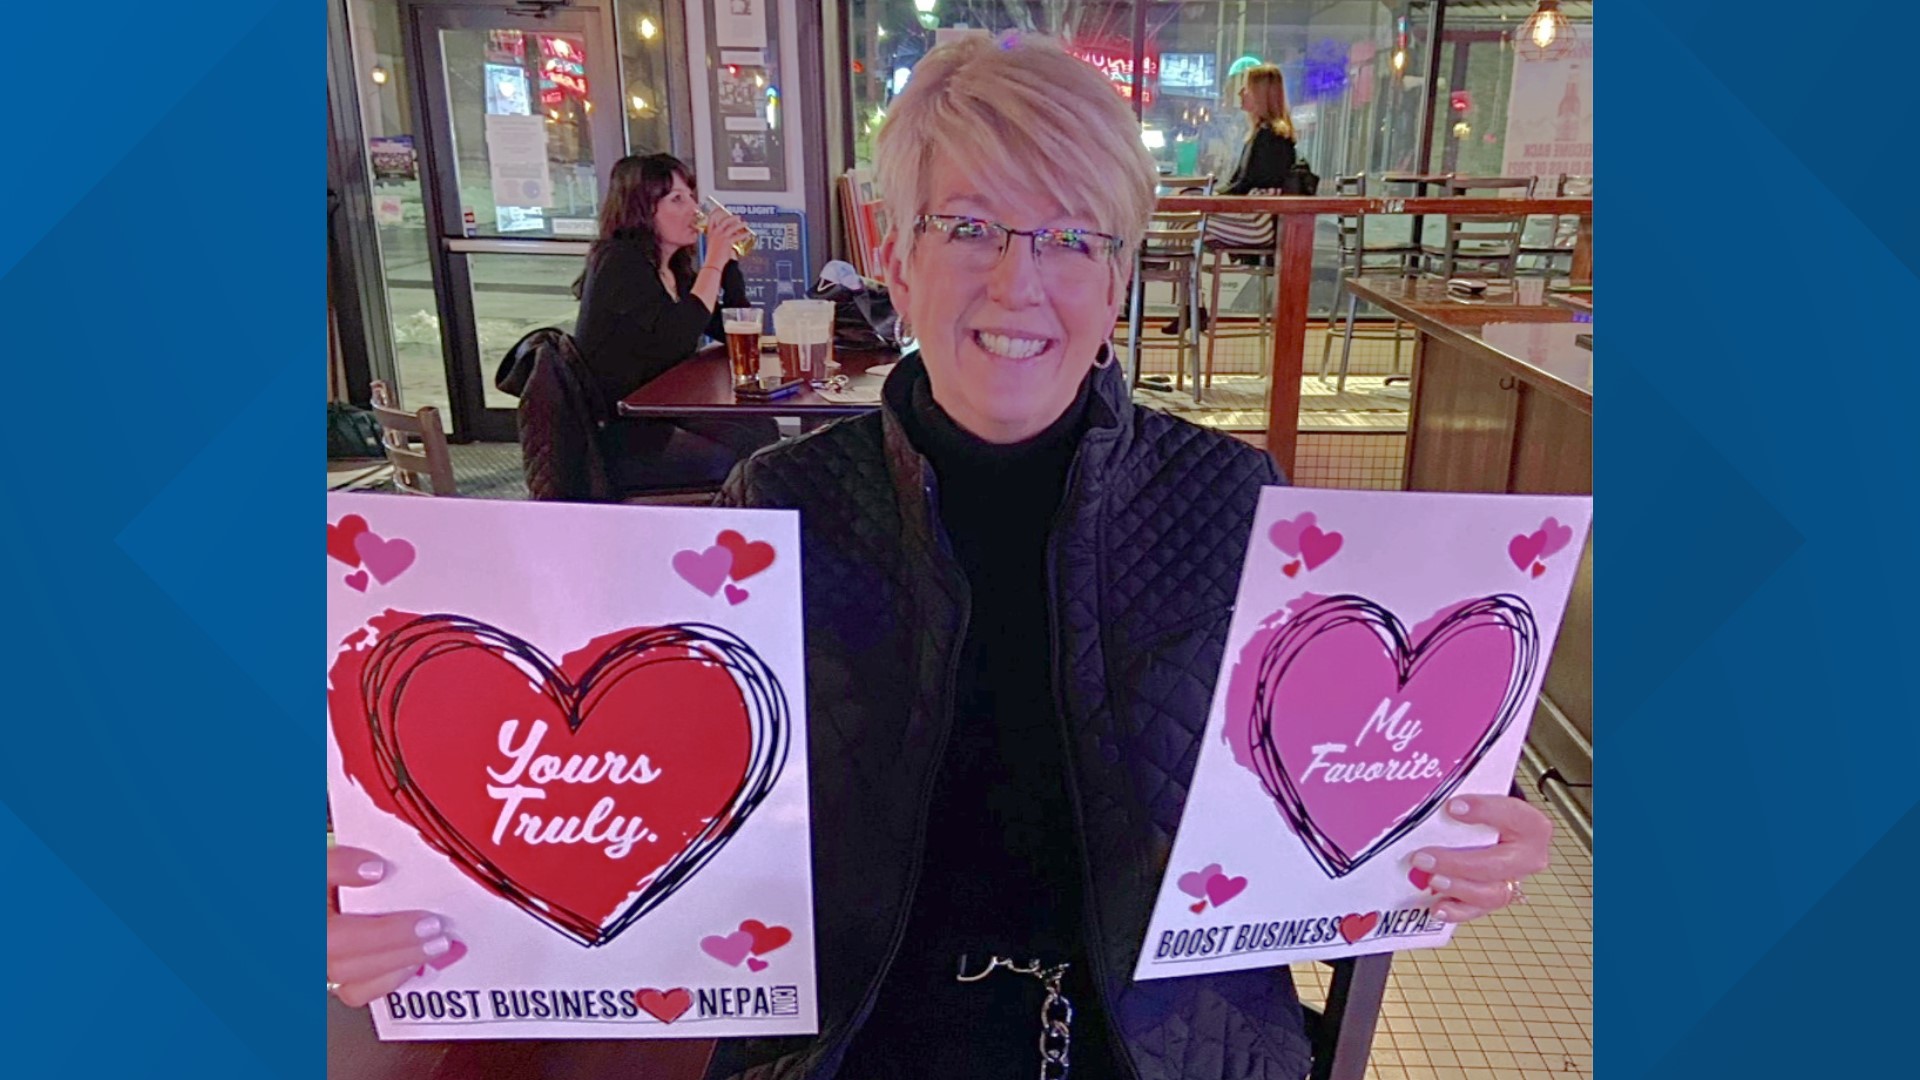 It's not too late to send a valentine that supports a local restaurant during an extra difficult time of year.